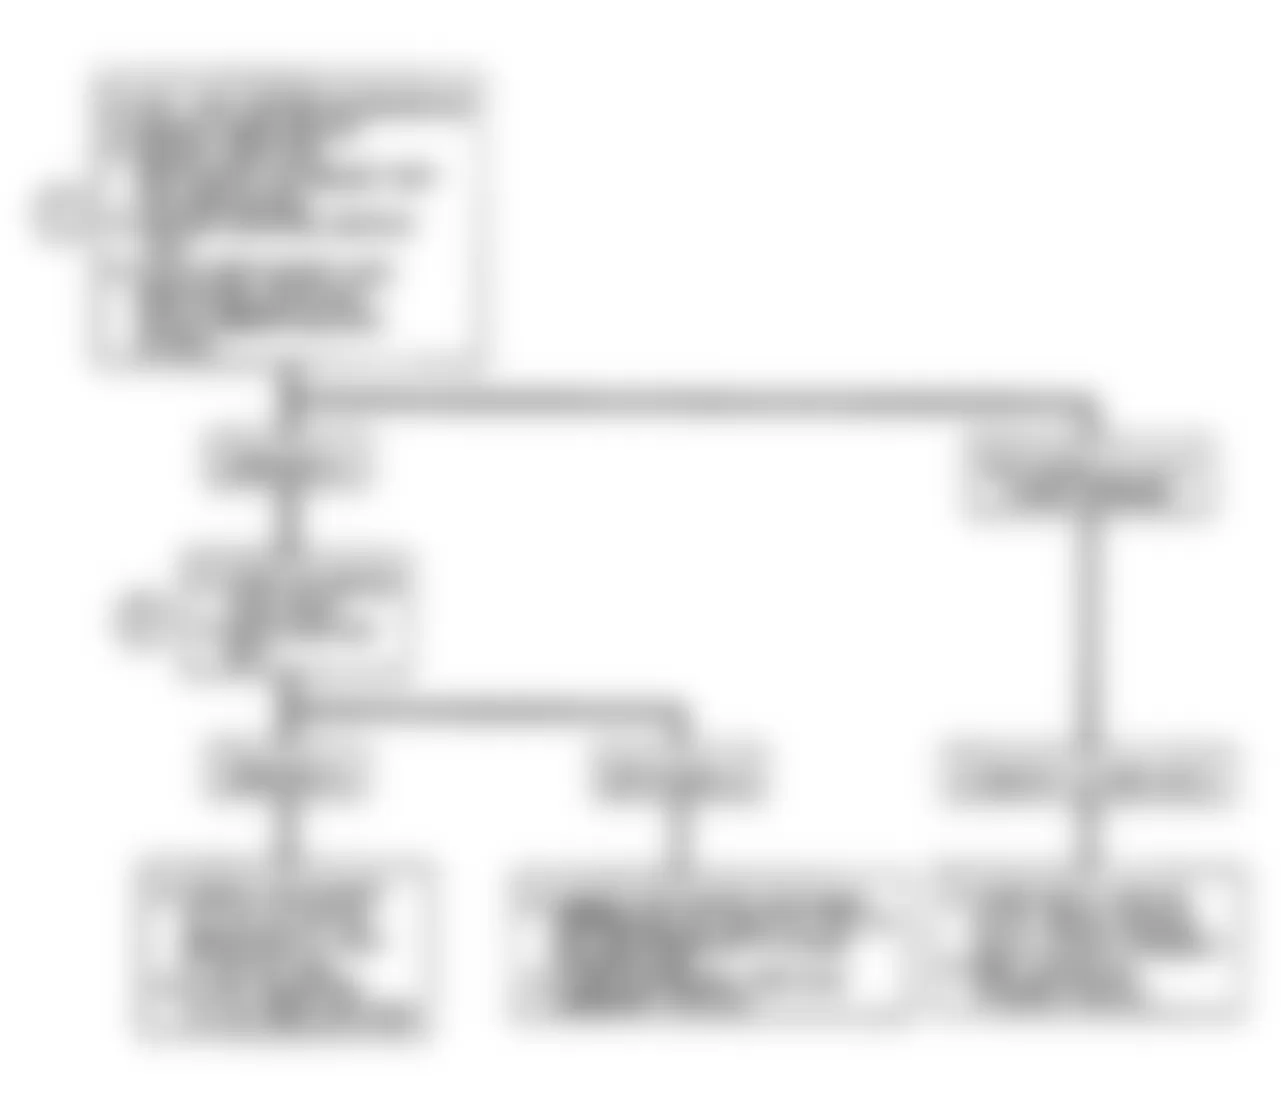 Buick Reatta 1990 - Component Locations -  Code B667: Flow Chart Set/Coast or Resume/Accel Circuit Shorted